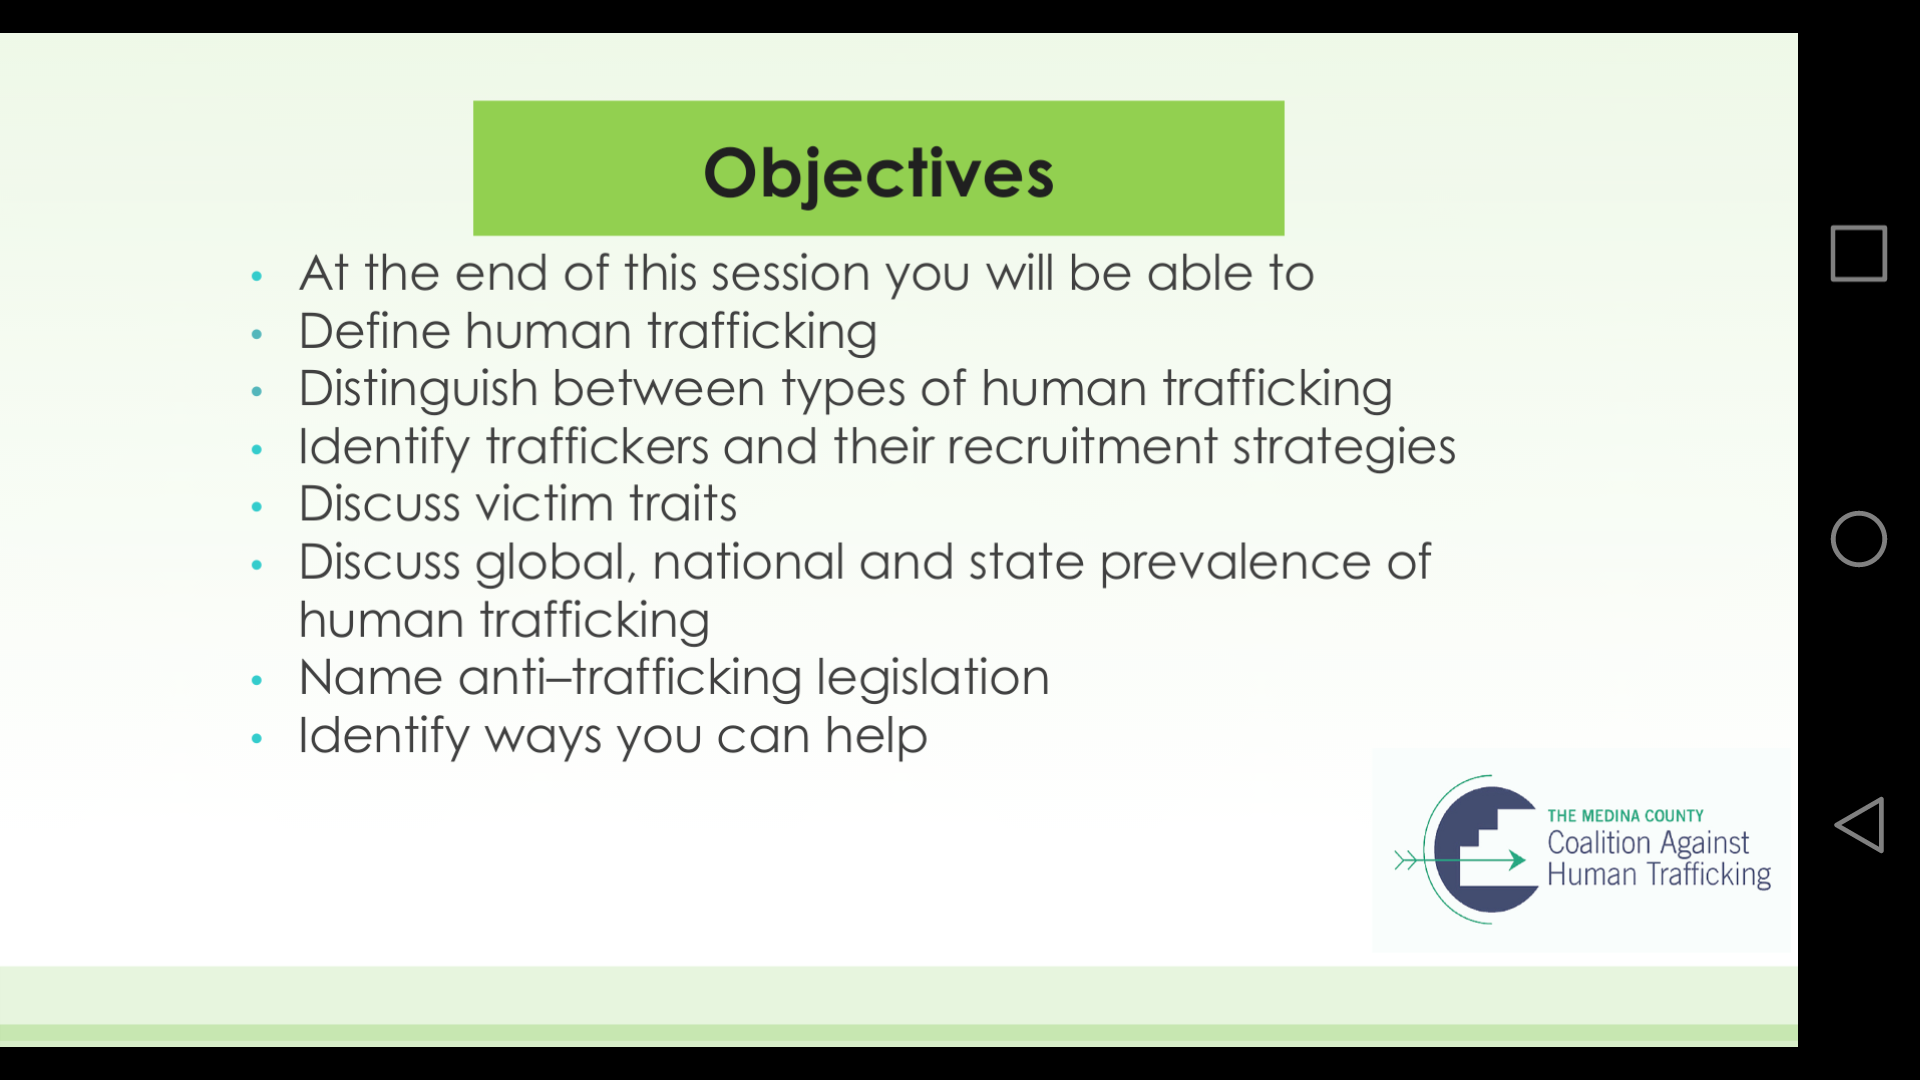 Overview Of Human Trafficking Preventative Education In Ohio Images, Photos, Reviews